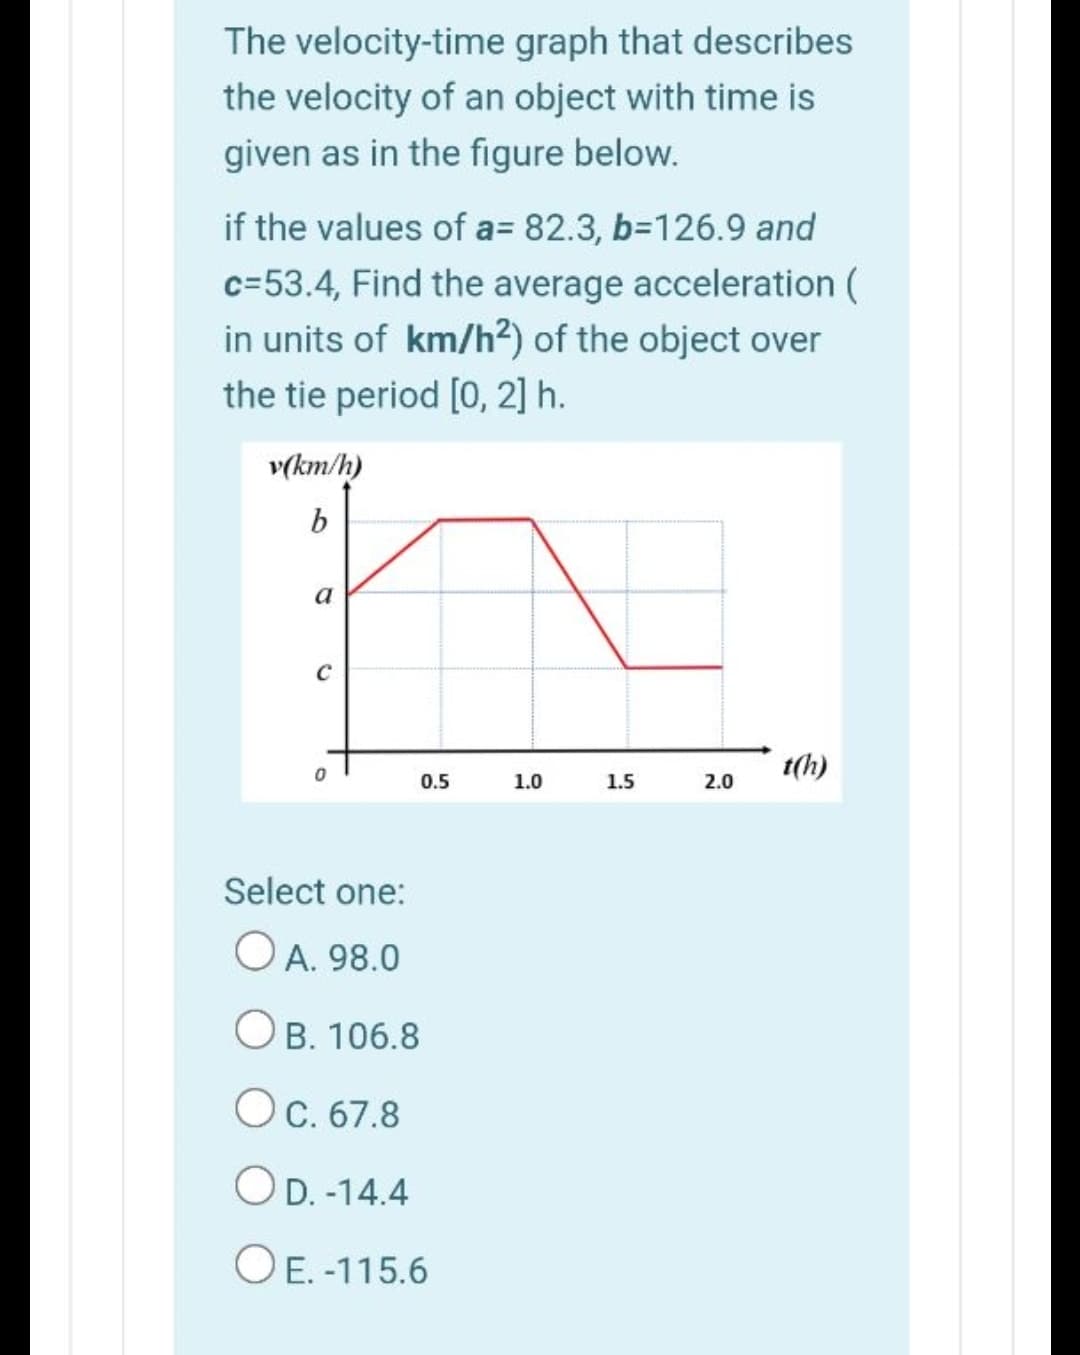 The velocity-time graph that describes
the velocity of an object with time is
given as in the figure below.
if the values of a= 82.3, b=126.9 and
c=53.4, Find the average acceleration (
in units of km/h²) of the object over
the tie period [0, 2] h.
v(km/h)
b
a
t(h)
0.5
1.0
1.5
2.0
Select one:
O A. 98.0
Ов. 106.8
Ос. 67.8
OD. -14.4
O E. -115.6
